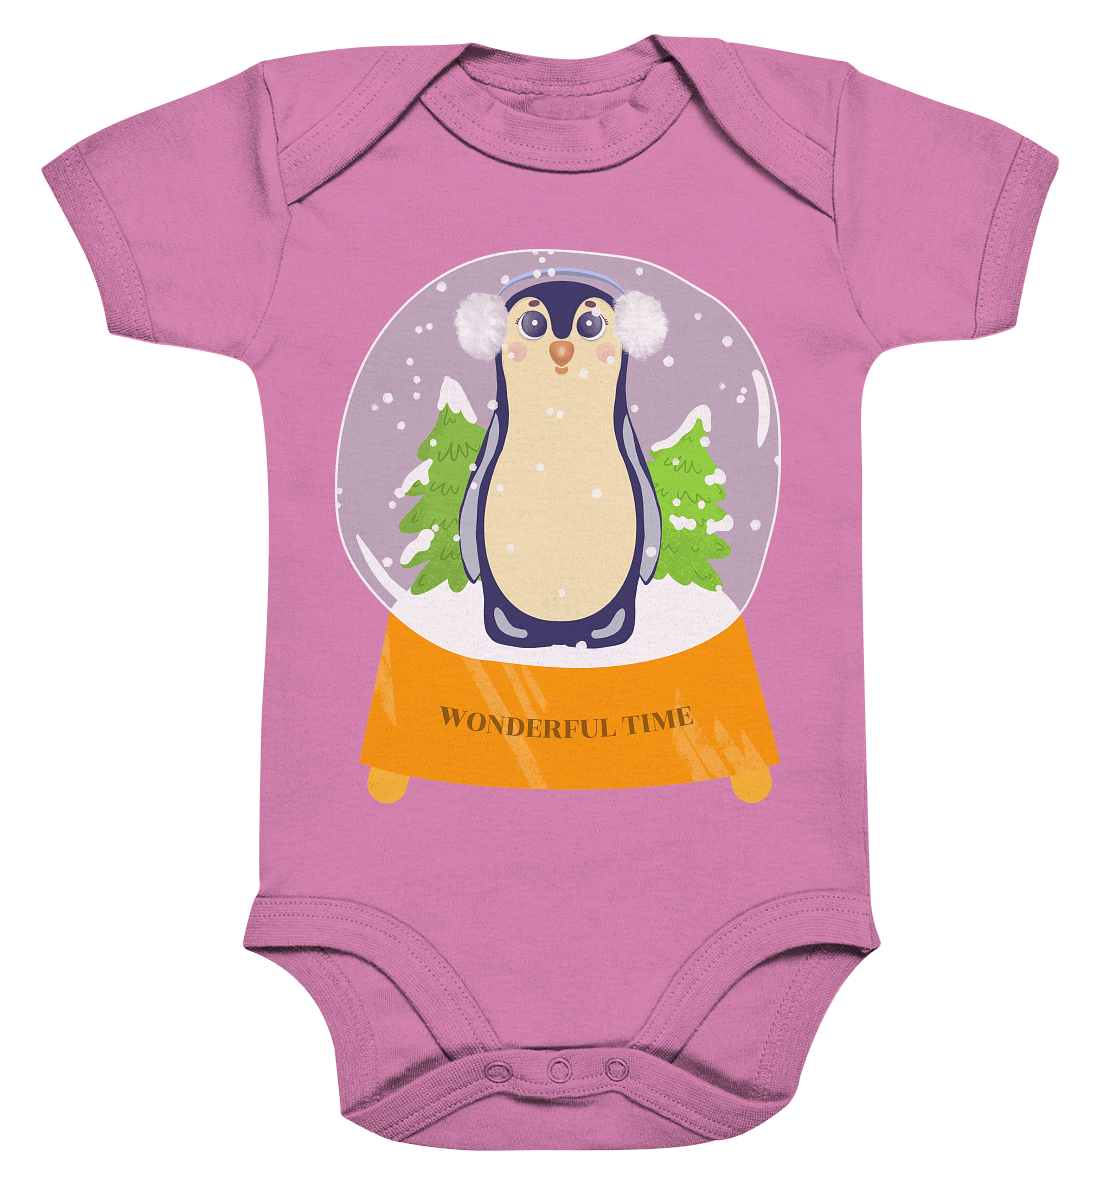 Pinguin Baby Strampler Hug me I am cold in pink mit Pinguin Cartoon Print BLOOMINIC